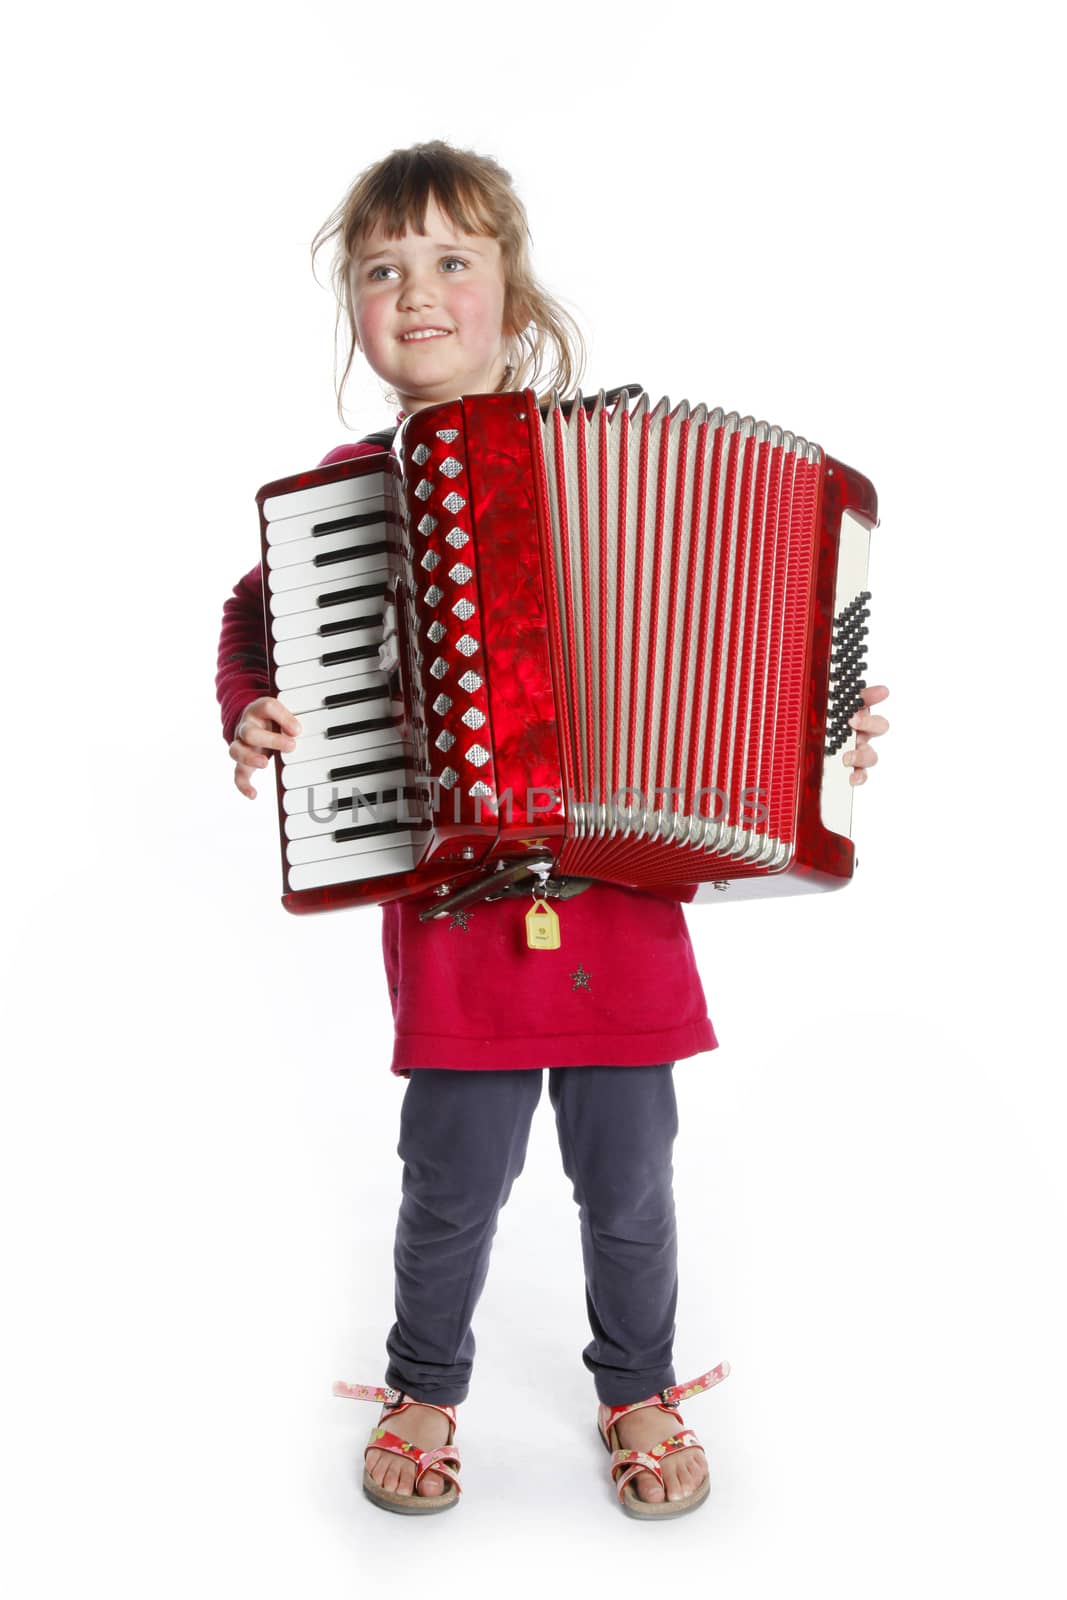 very young girl with accordion in studio against white background